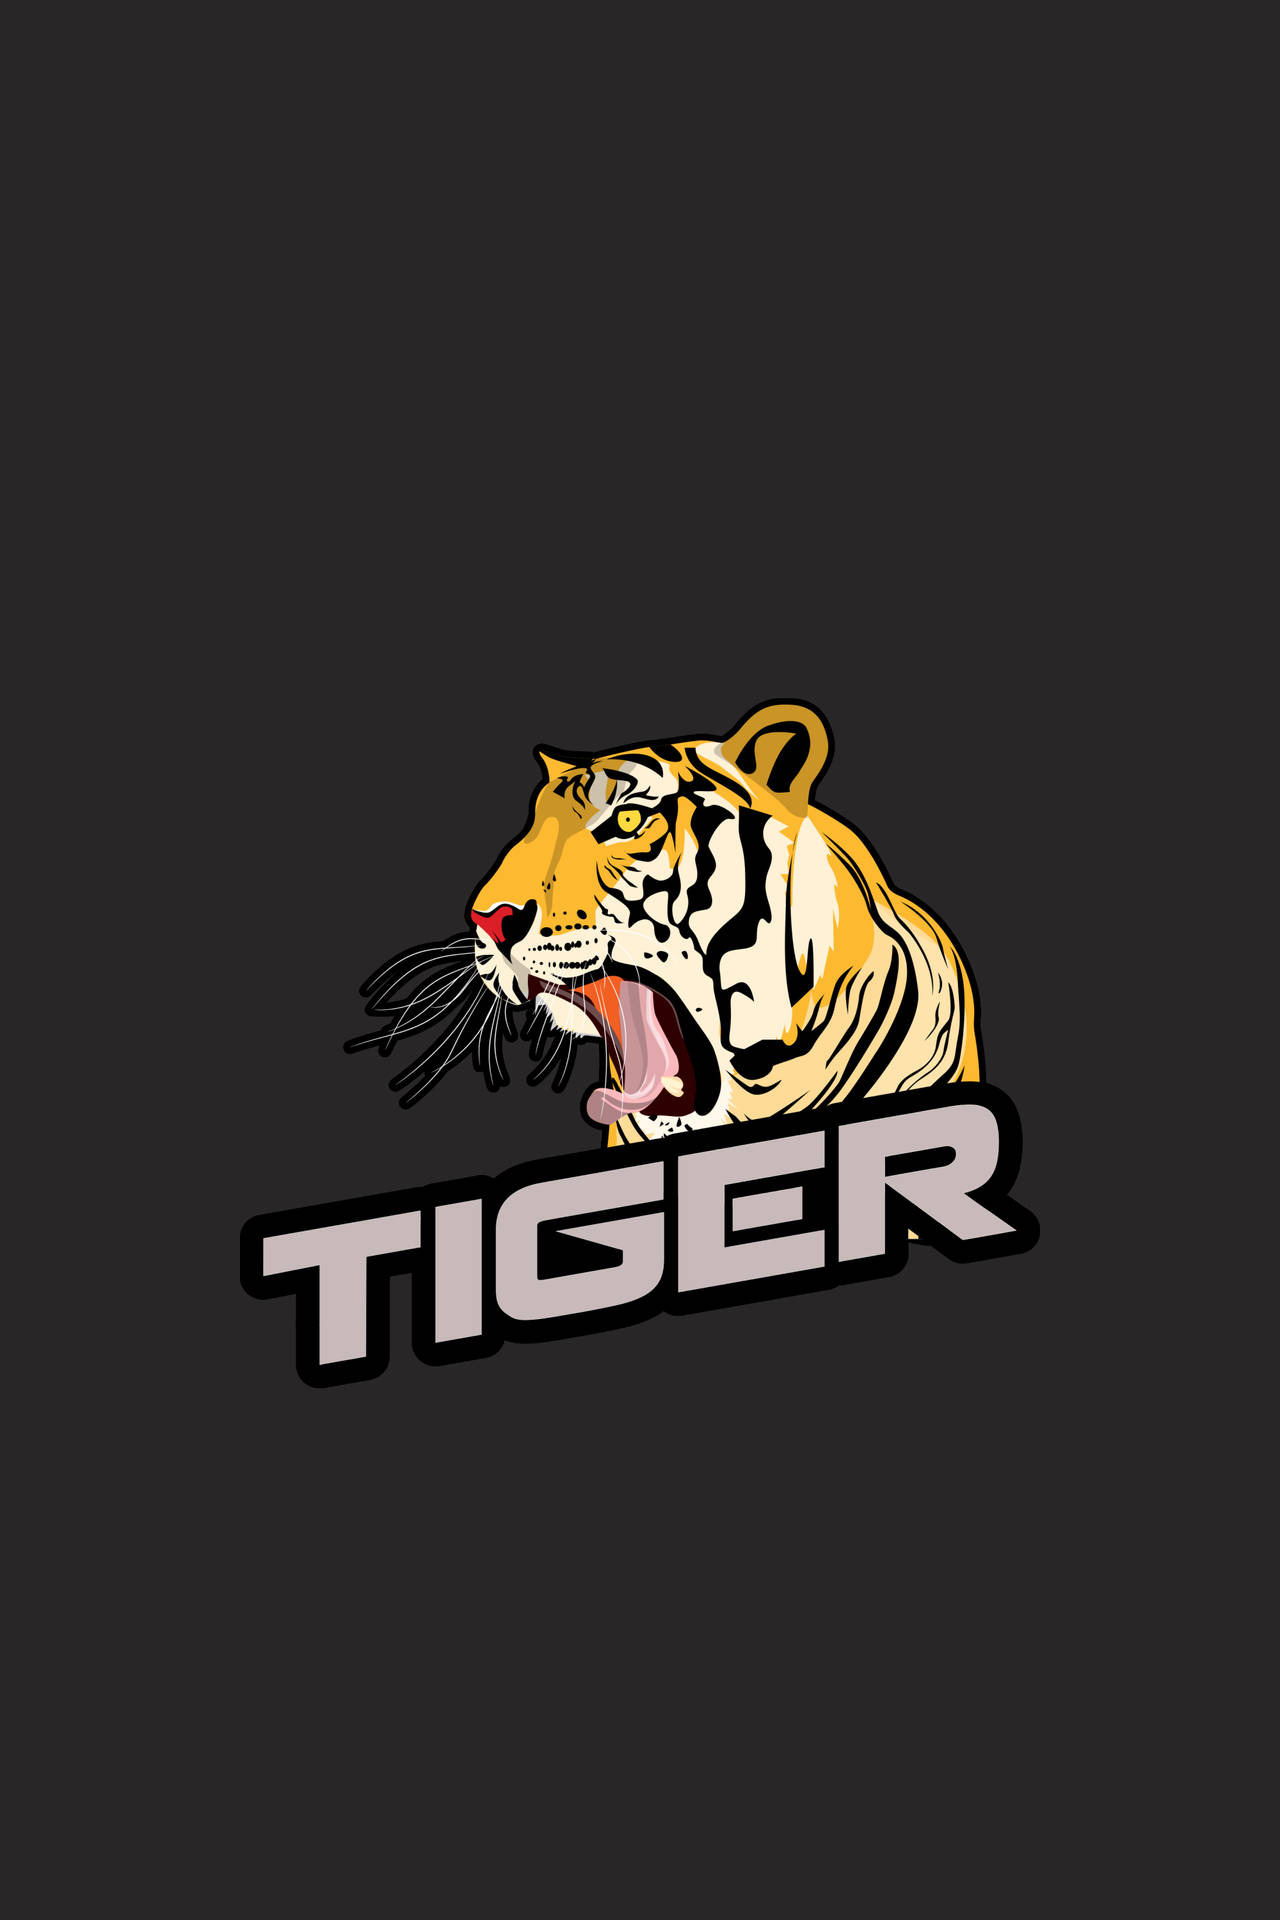 Top 999+ Tiger Wallpaper Full HD, 4K✅Free to Use